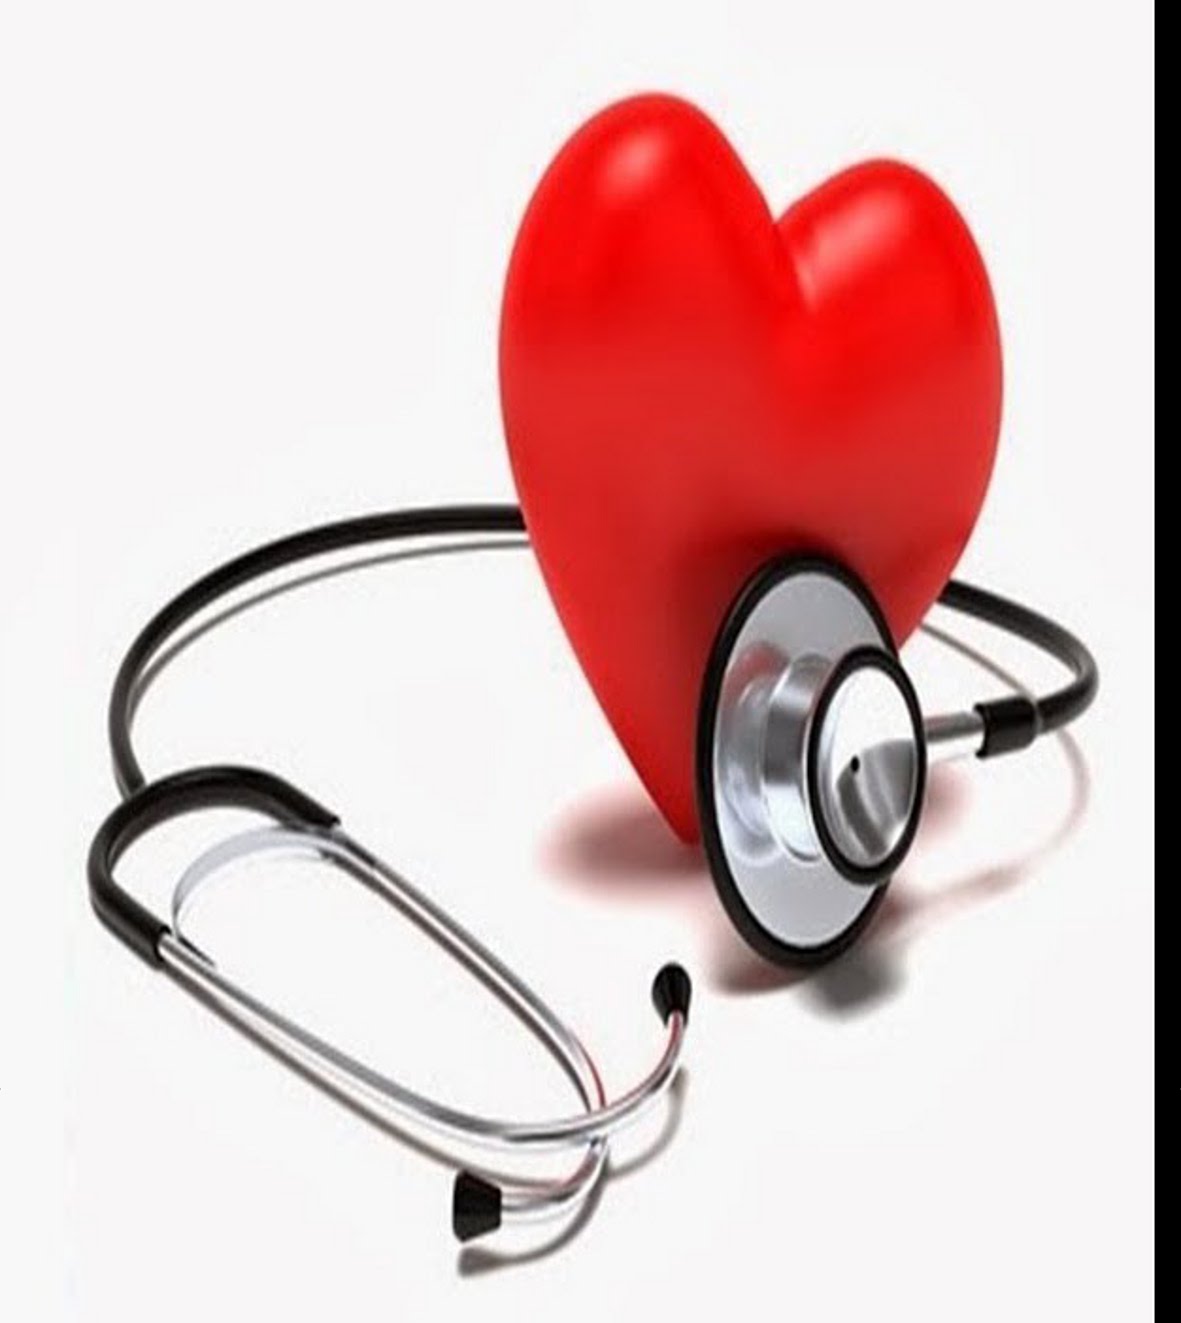 Heart diseases will be investigated from eye